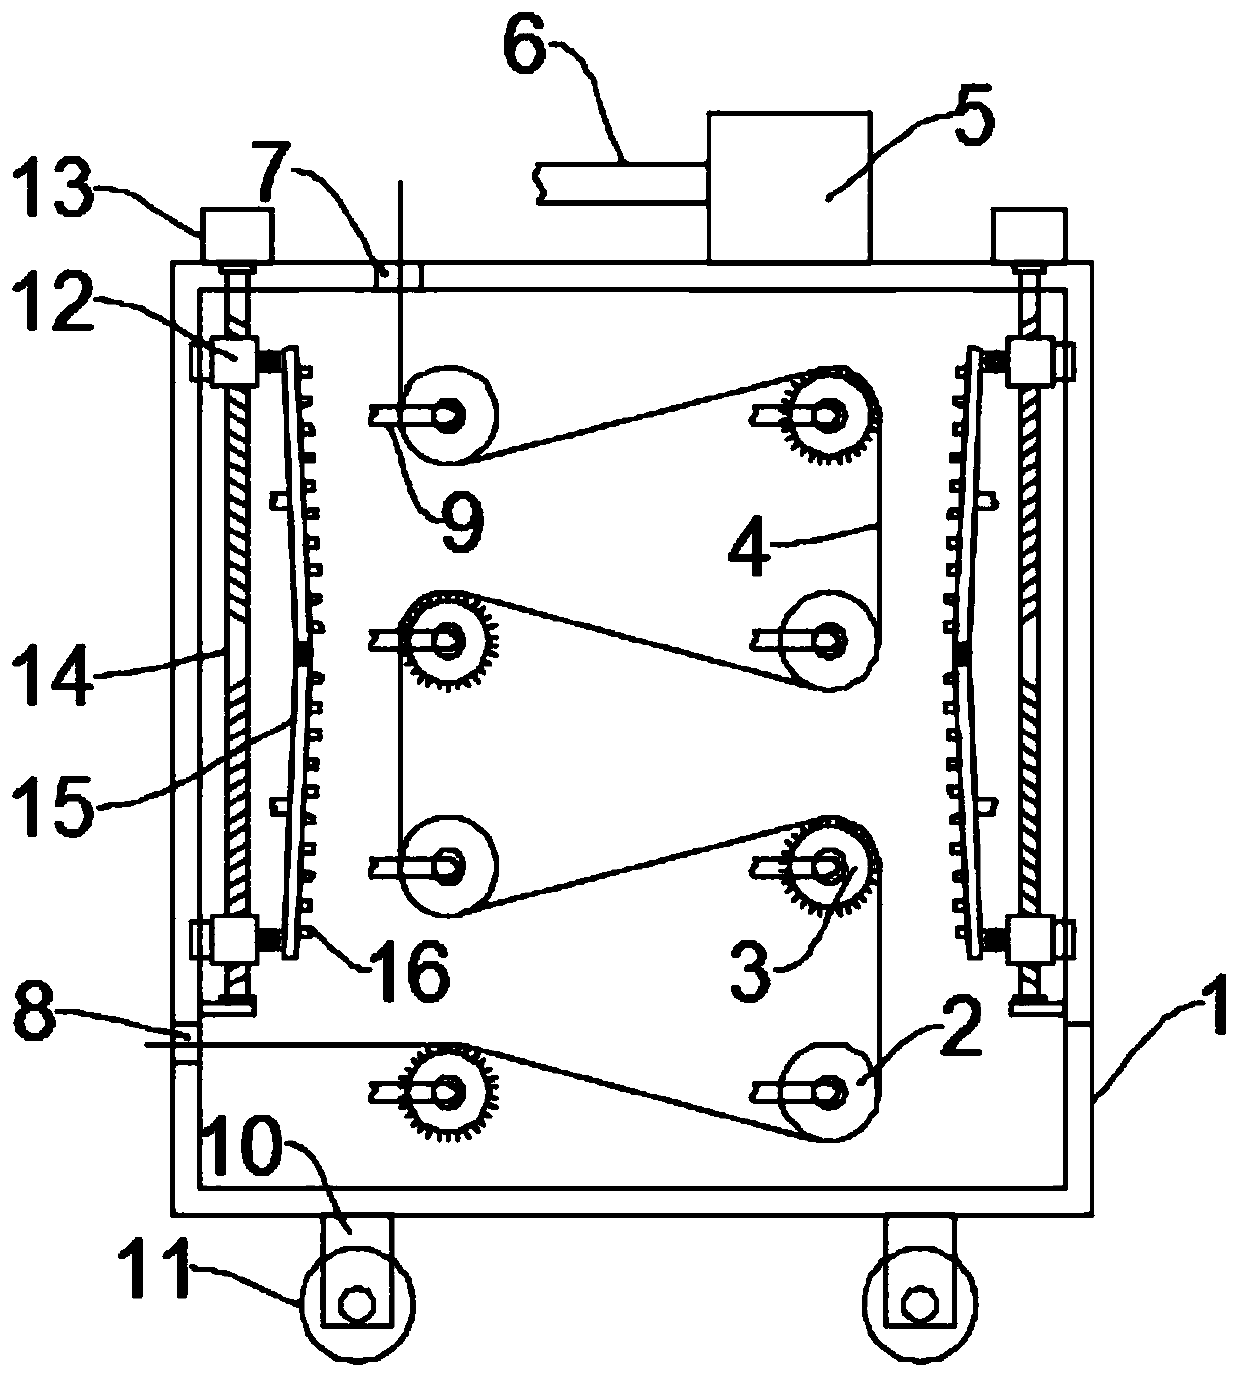 Device for removing textile dust on textile fabric